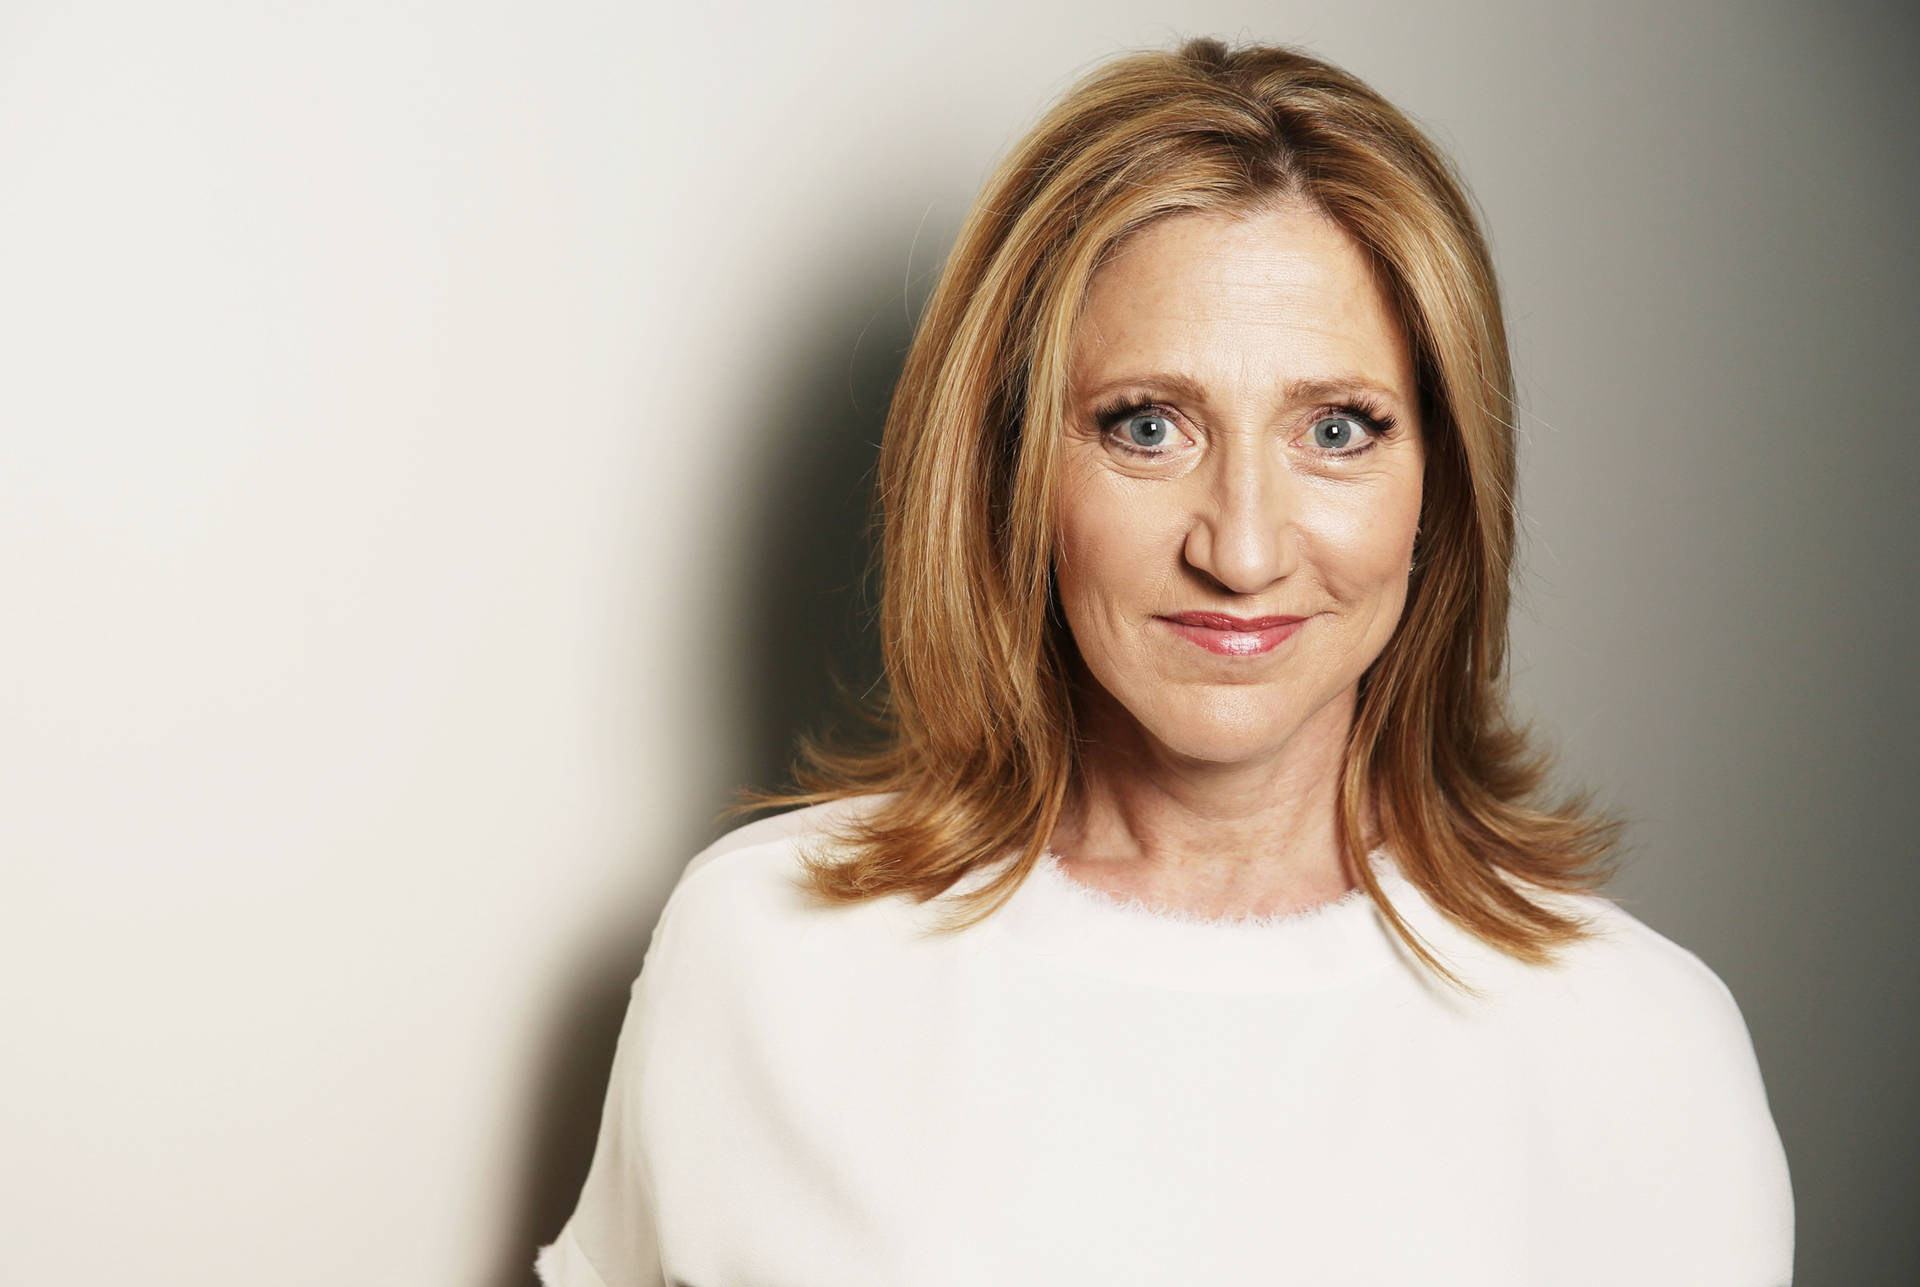 'Edie Falco in a Sophisticated White Top' Wallpaper